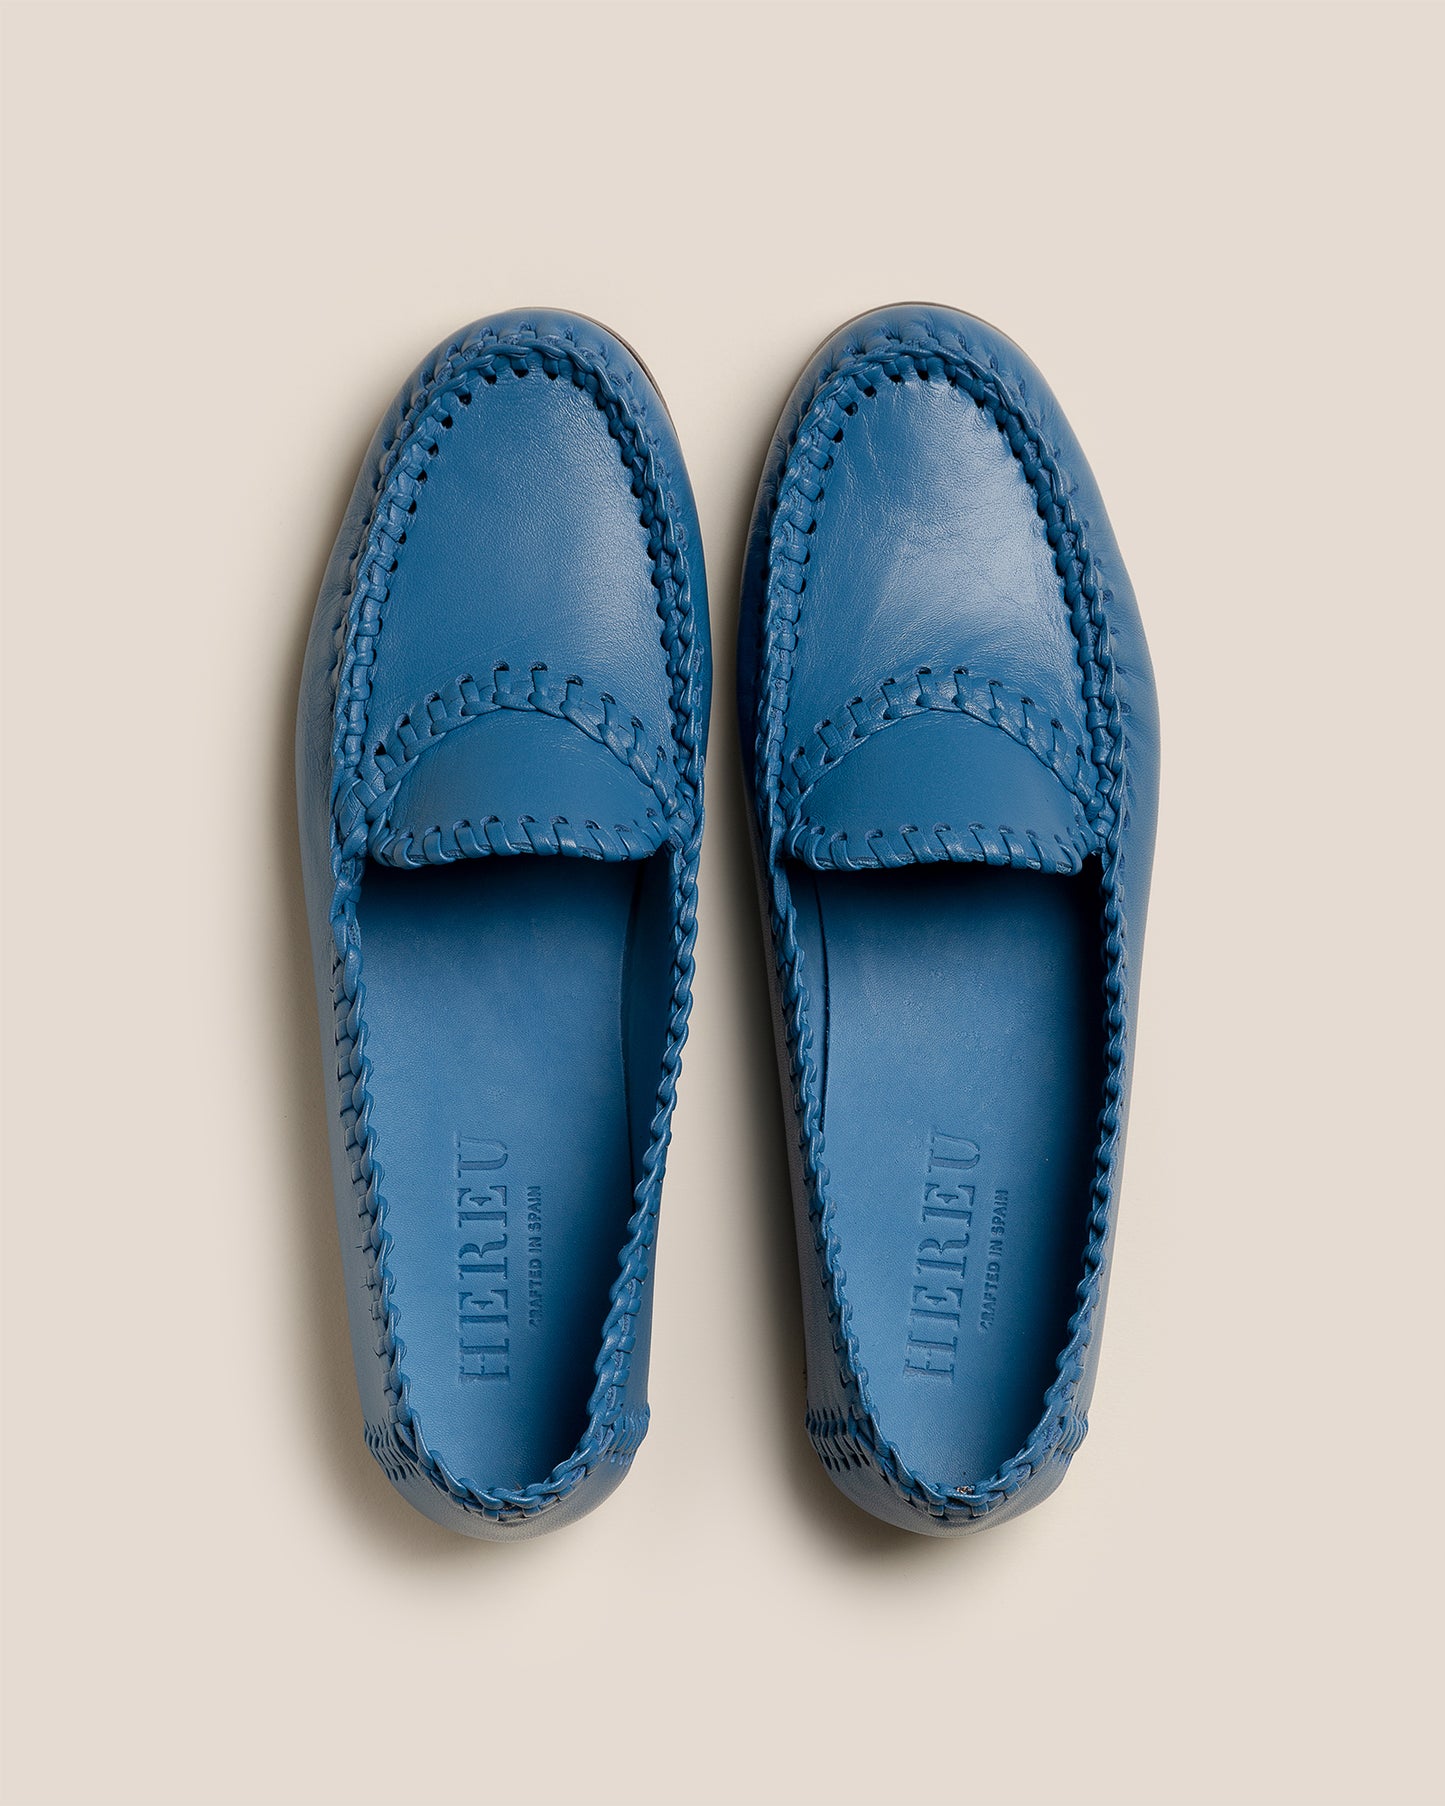 SASTRE - Braided Seams Pull-on Loafer